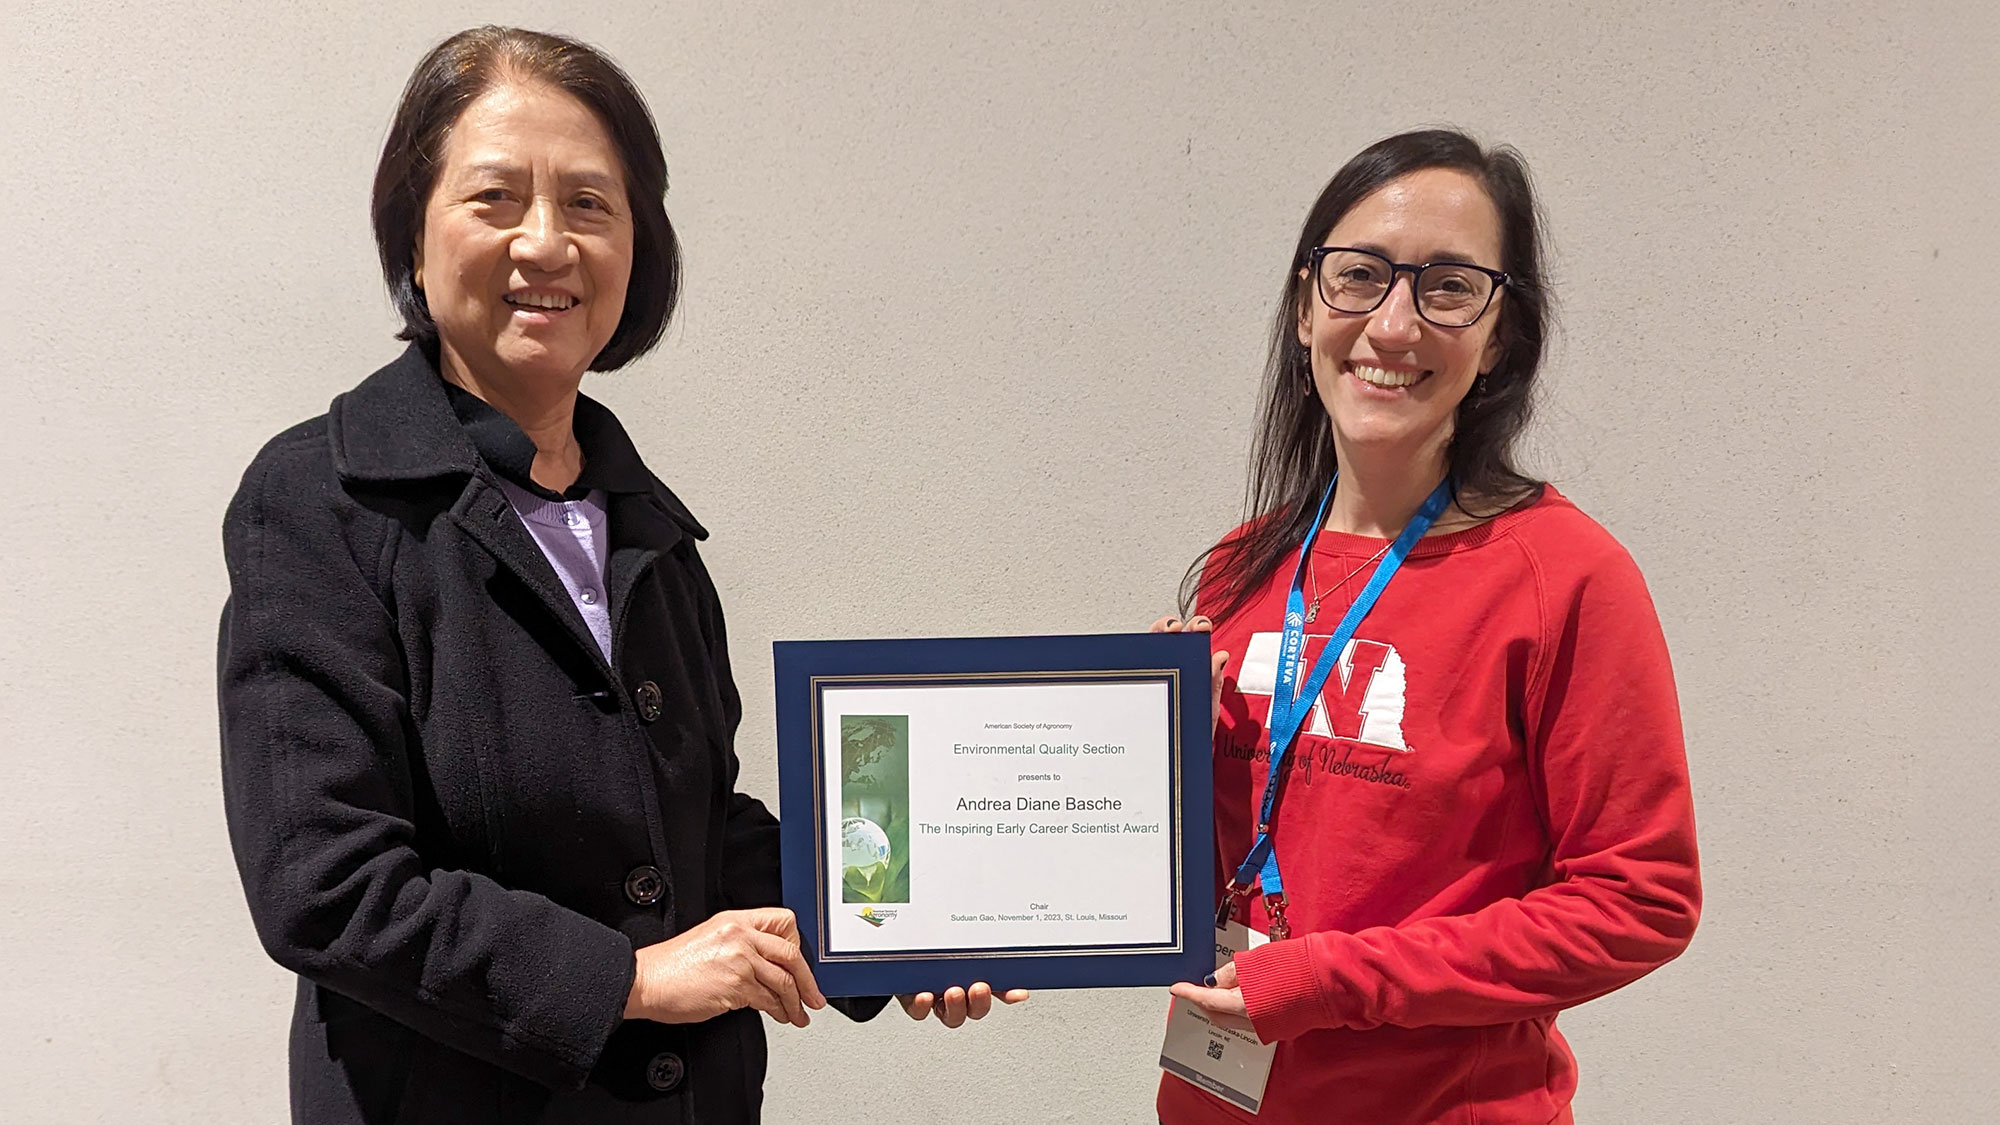 Suduan Gao, Chair of the Environmental Quality Section of the American Society of Agronomy (left), awards Andrea Basche the ASA EQS Inspiring Early Career Scientist Award at the ASA Awards Ceremony on Oct. 30 in St. Louis.